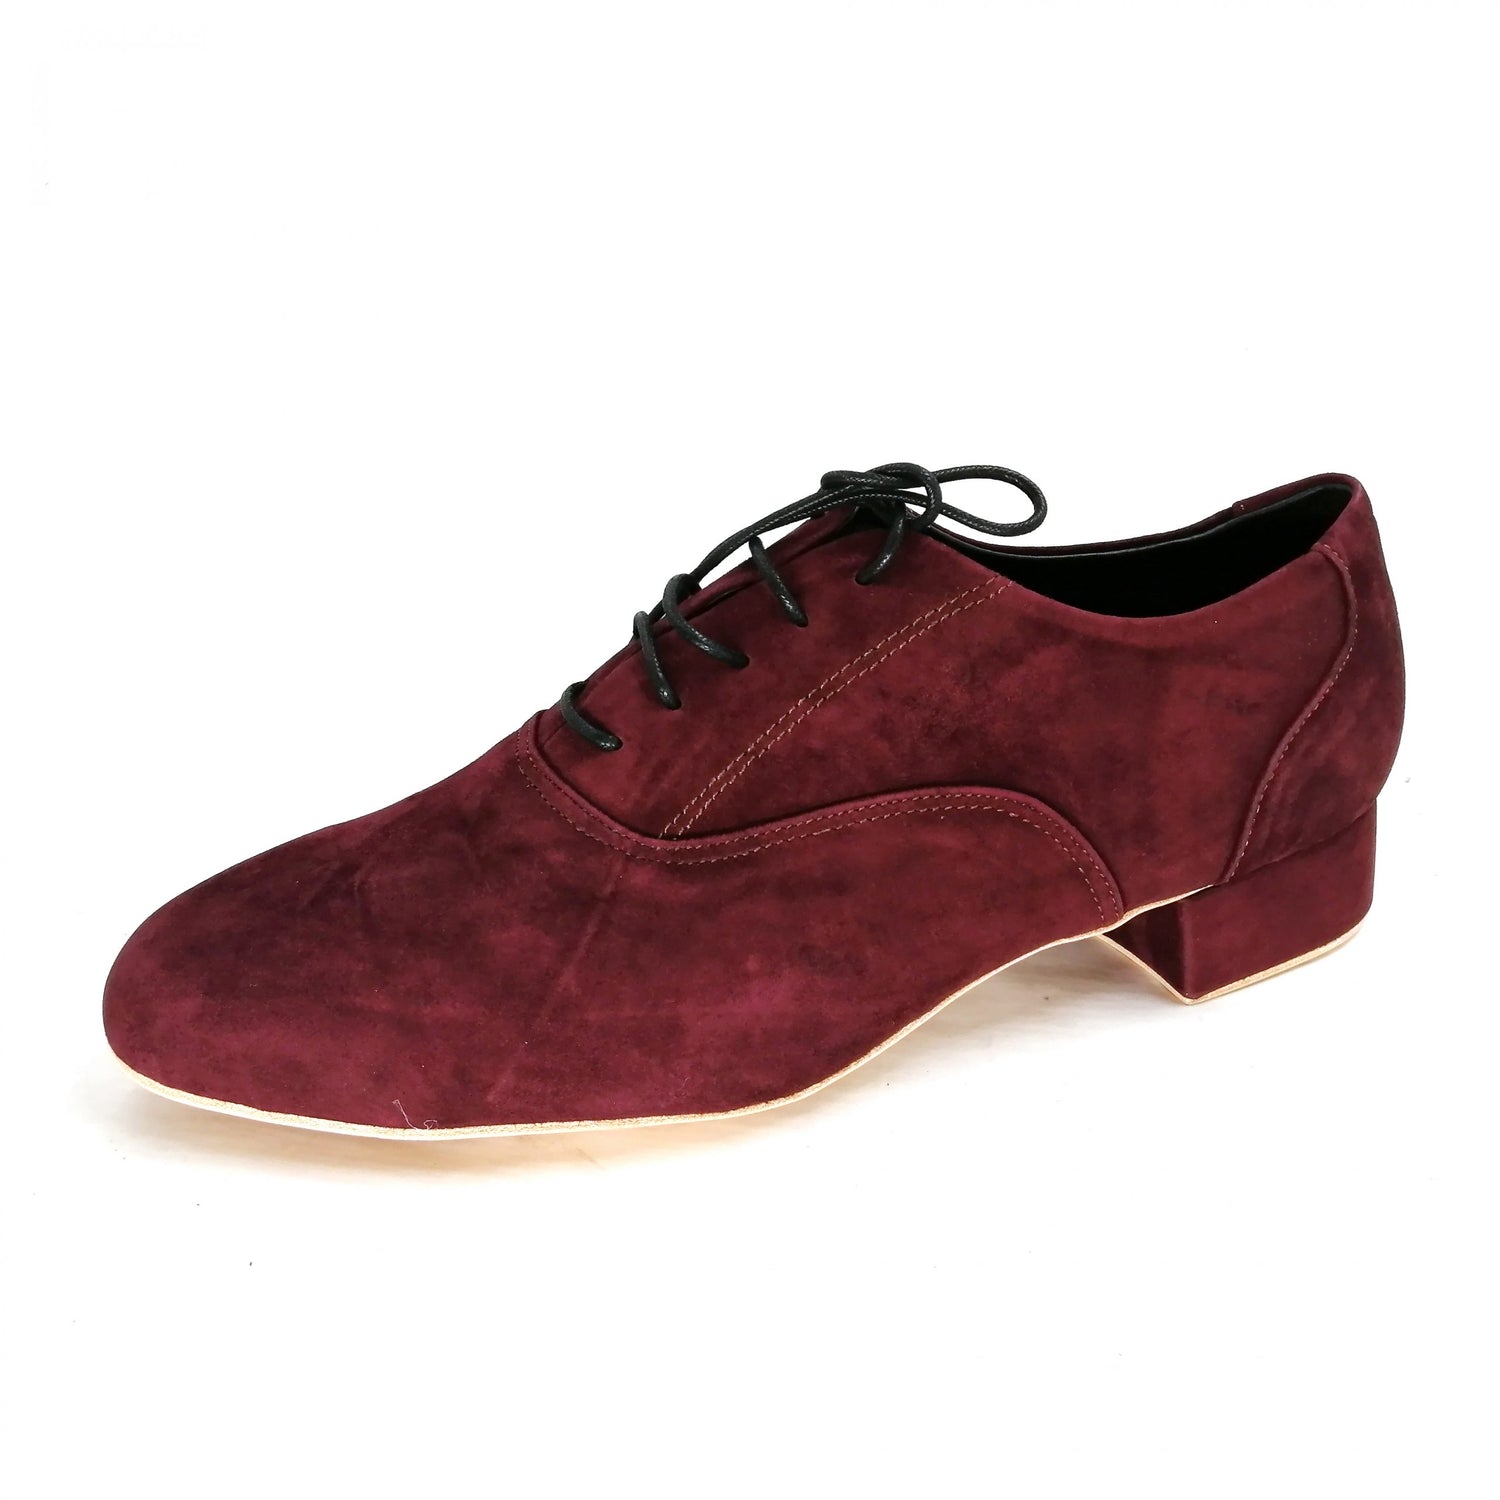 Men's Pro Dancer Argentine Tango Shoes with 1 inch Leather Heel and Lace-up in Brownish Red3